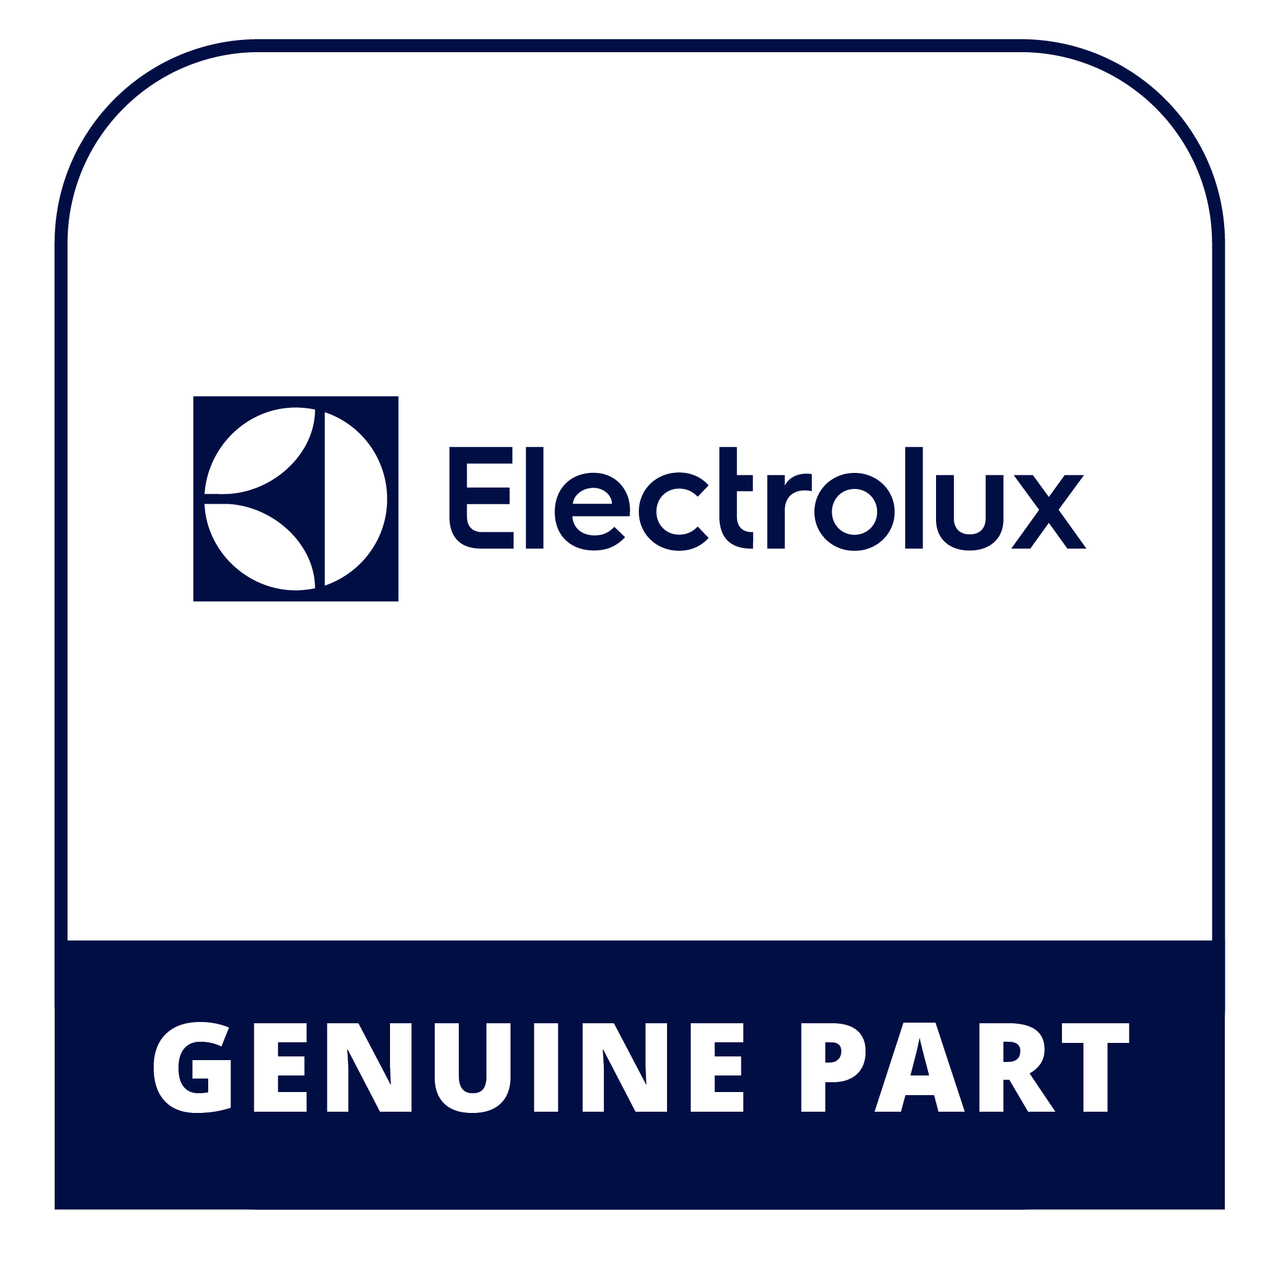 Frigidaire - Electrolux 316901108 Owners Manual - Genuine Electrolux Part